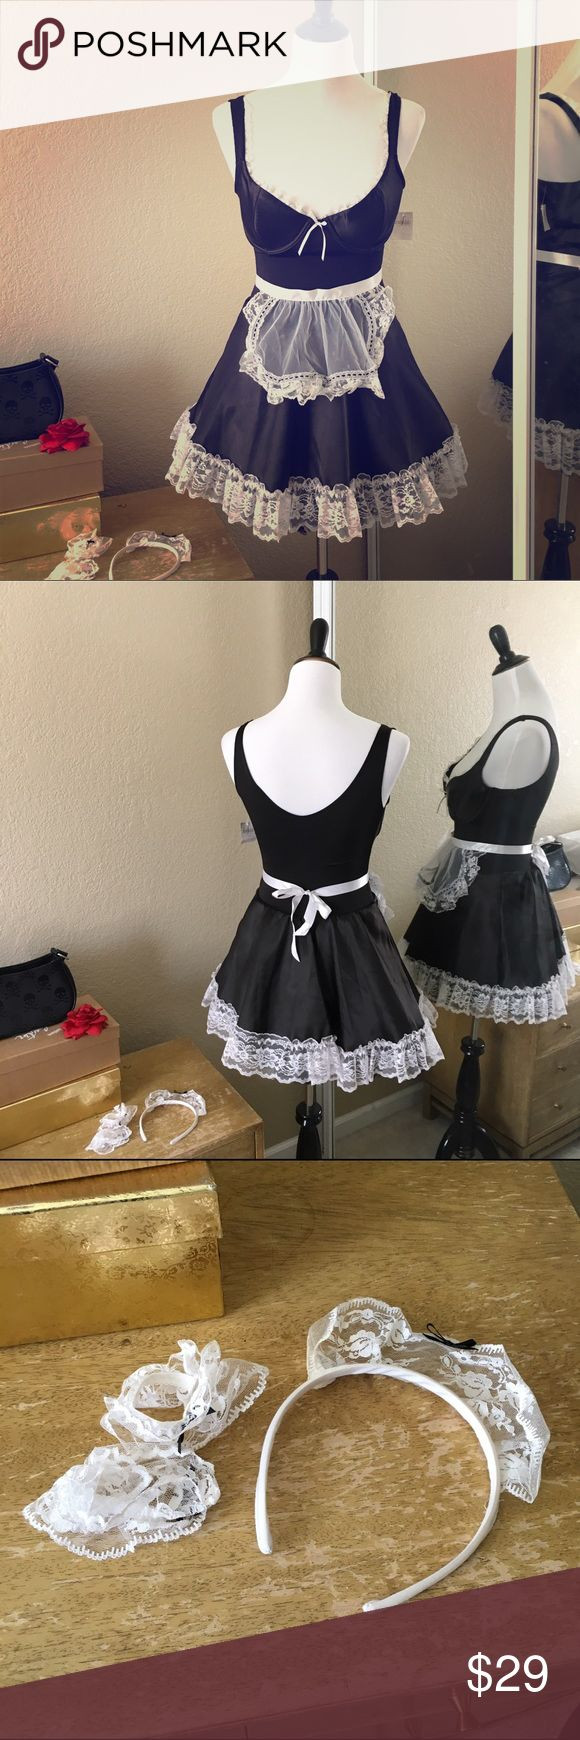 French Maid Costume DIY
 25 best ideas about French maid lingerie on Pinterest